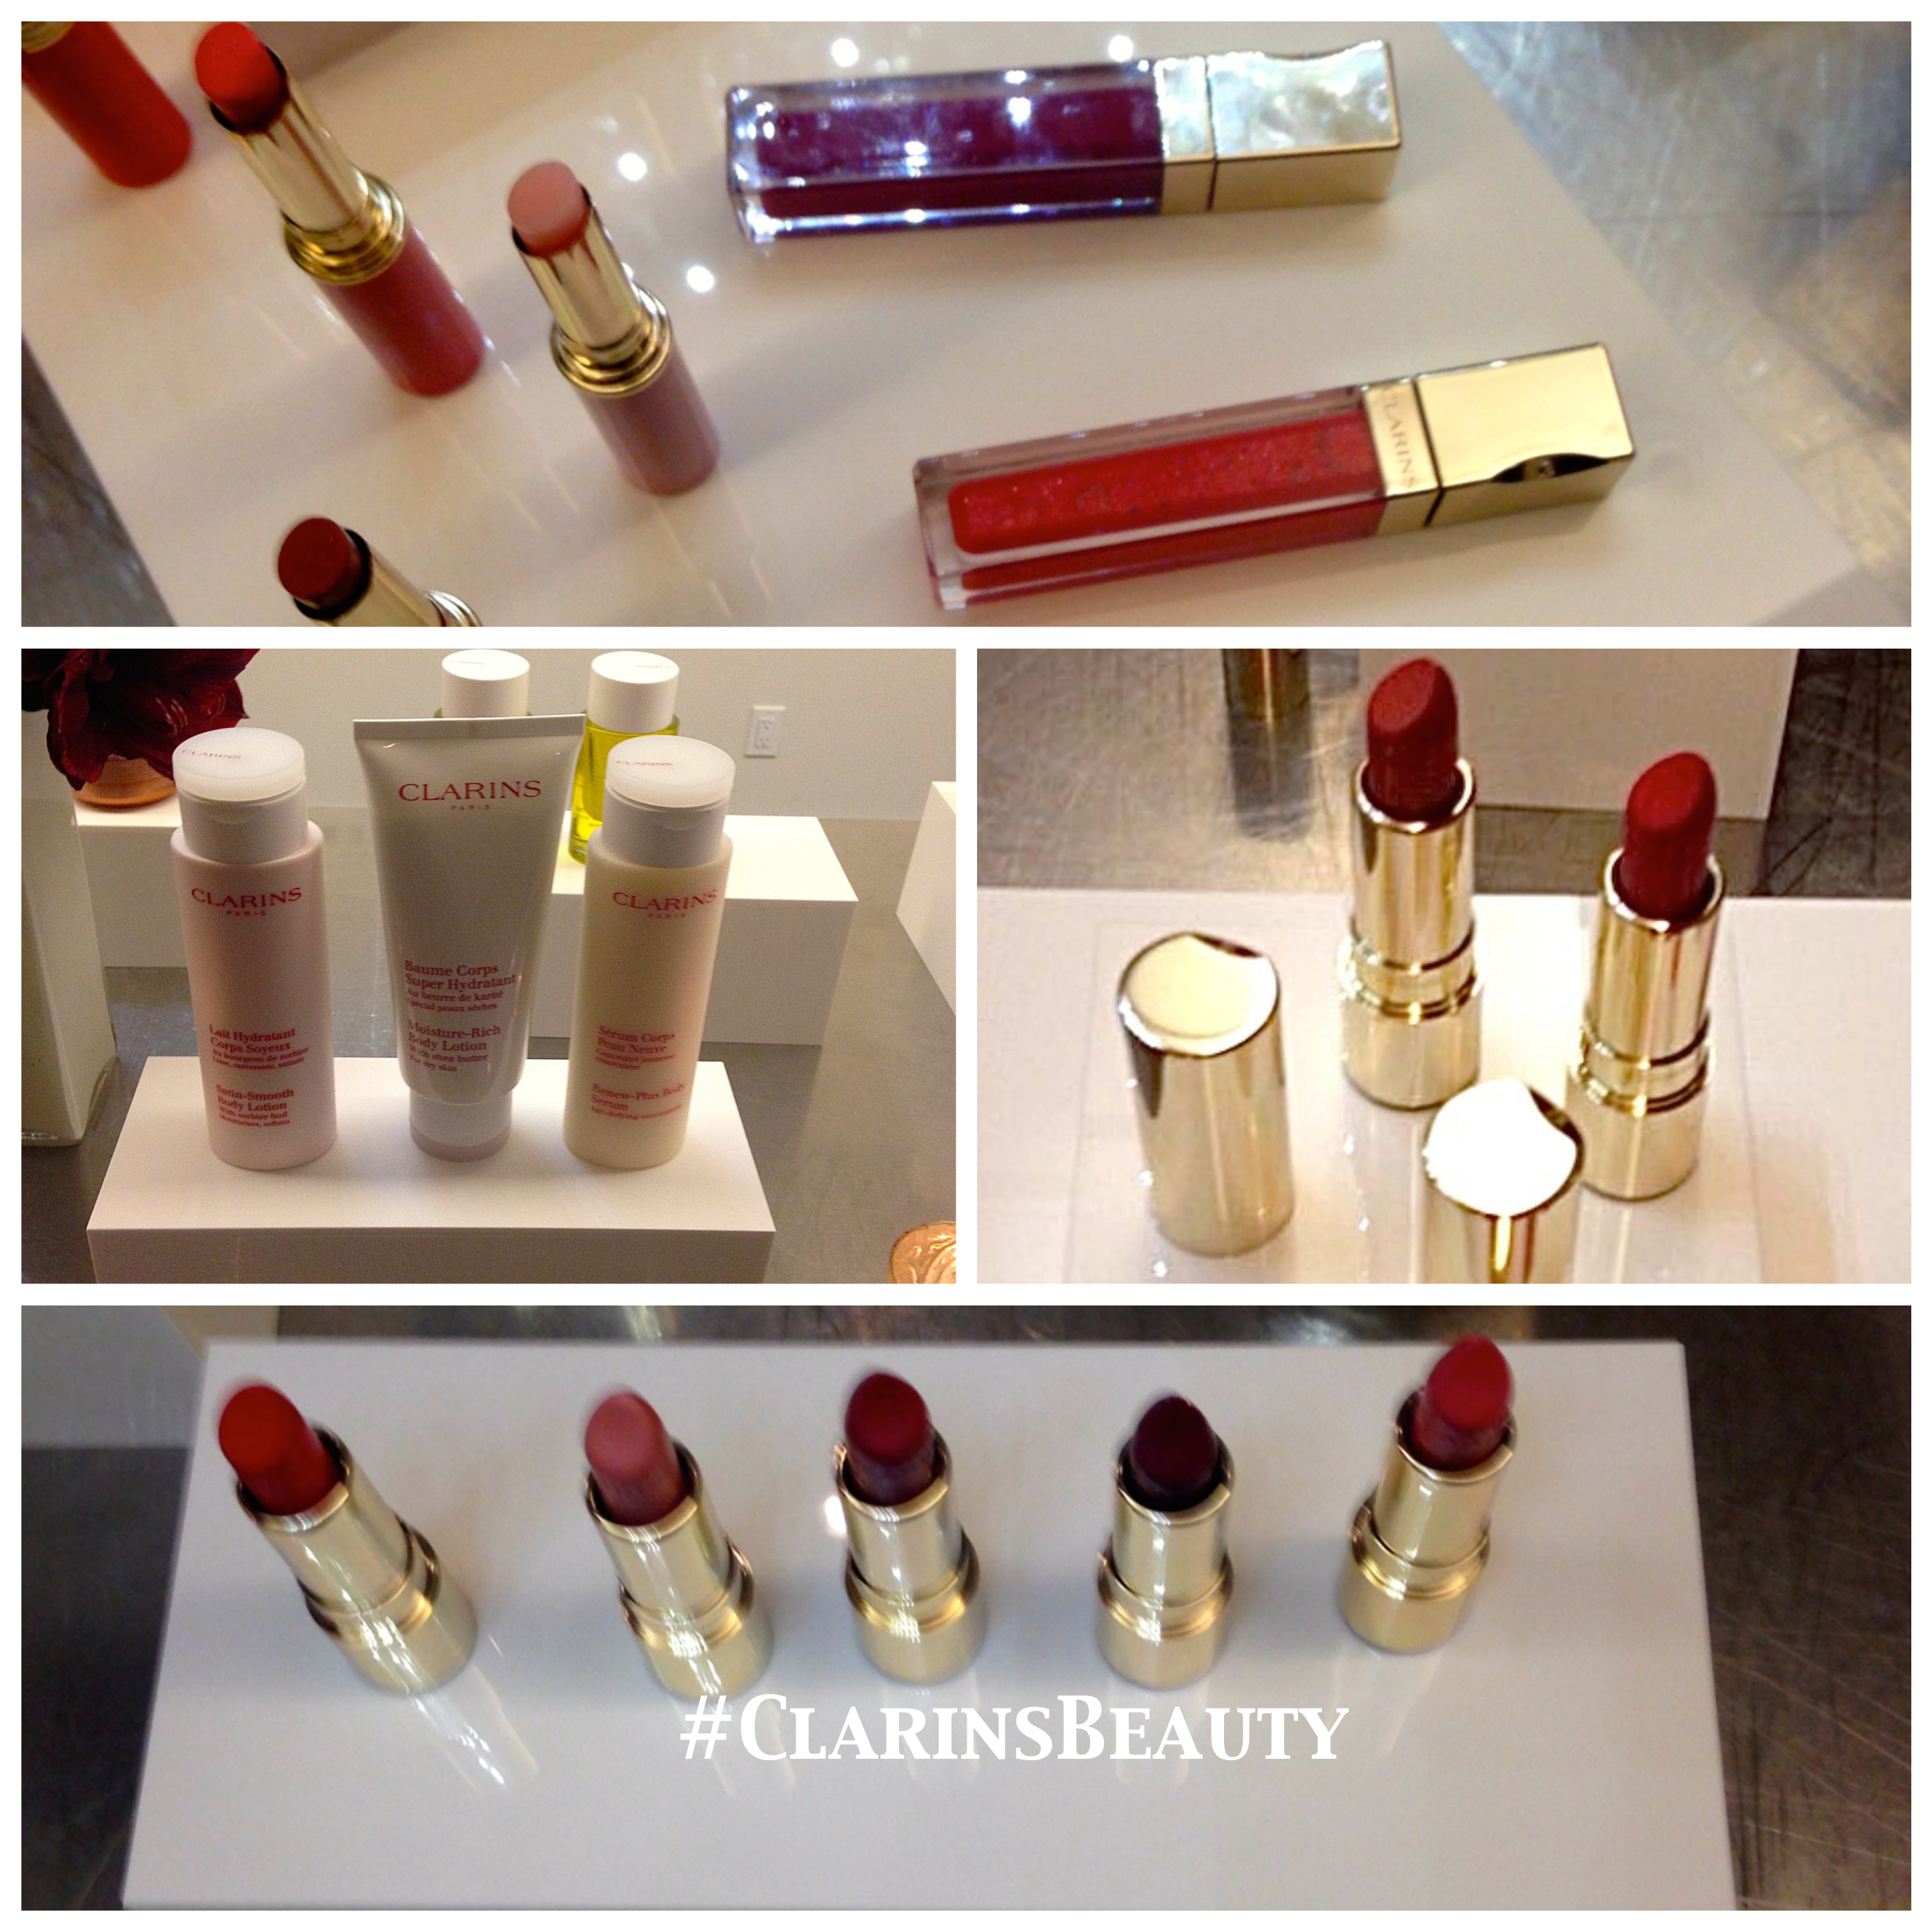 #ClarinsBeauty VIP Dinner with Dave Lackie